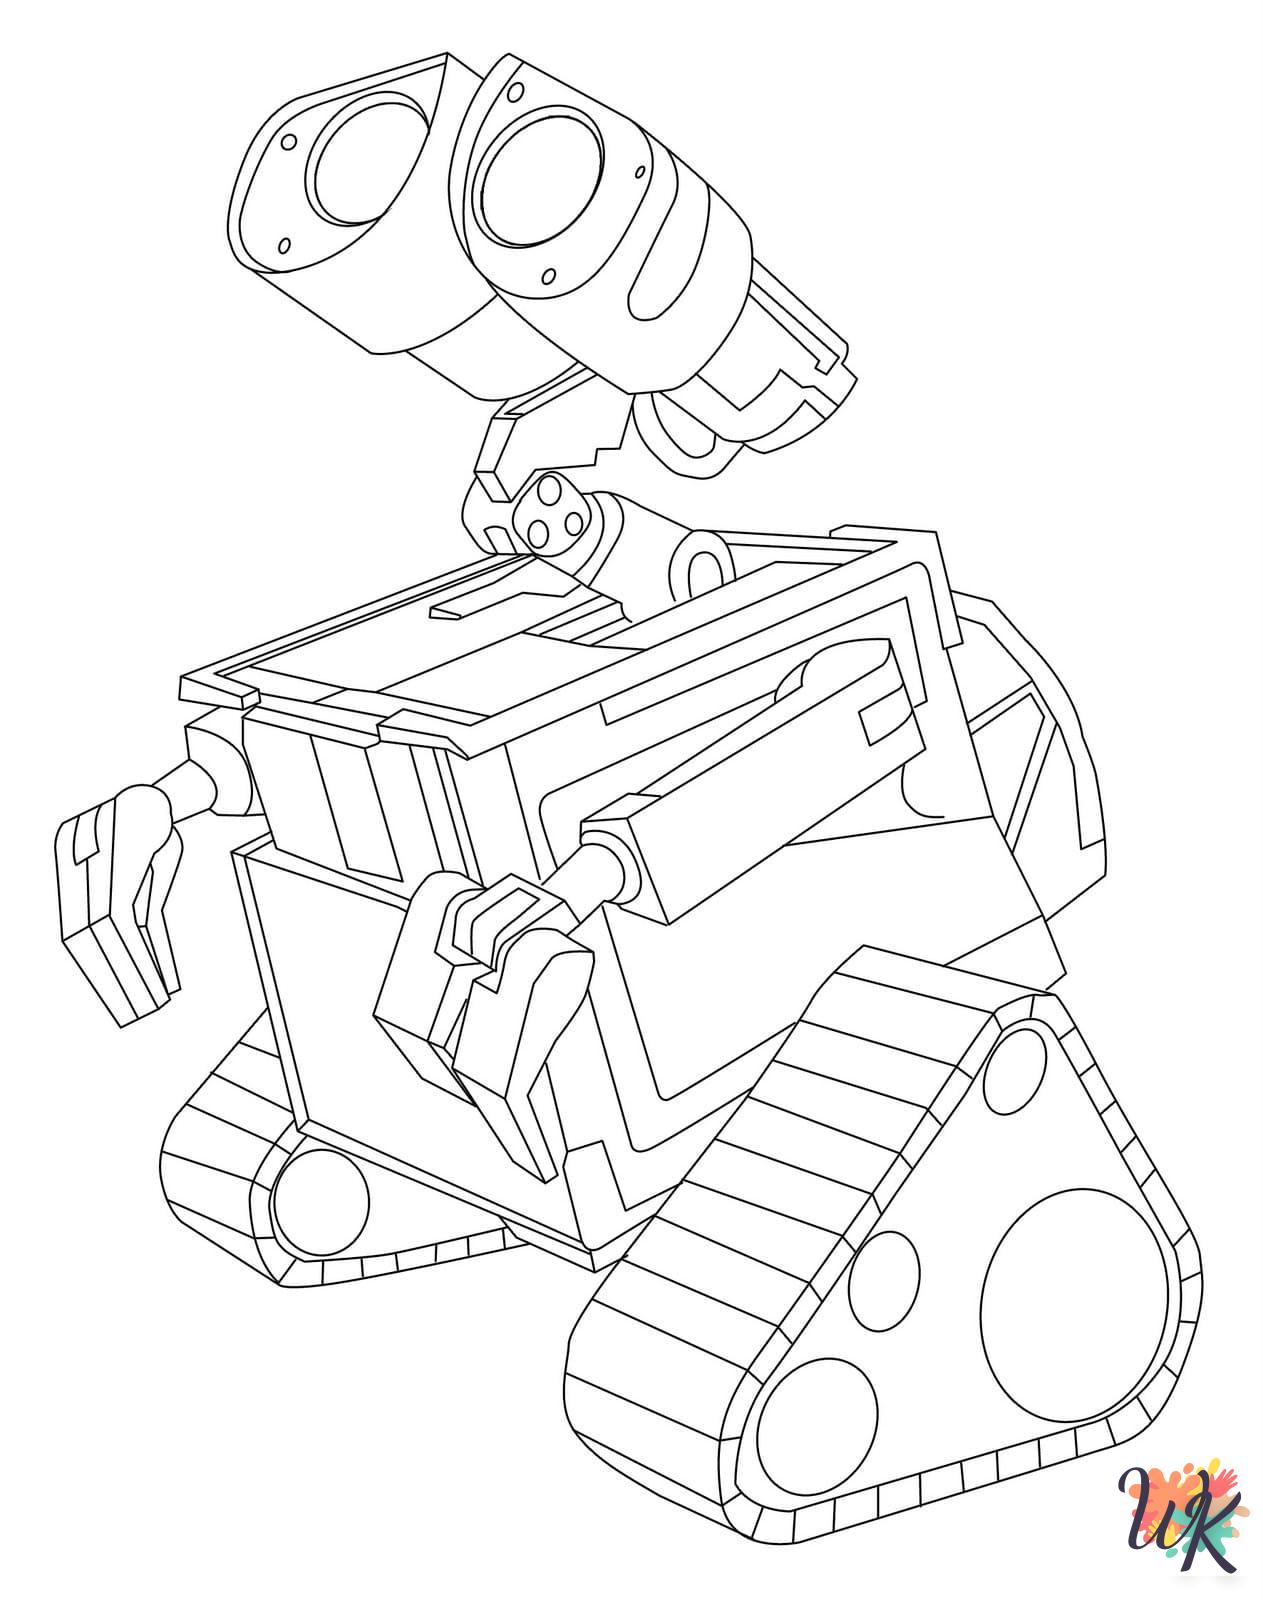 WALL-E coloring pages for adults easy 2